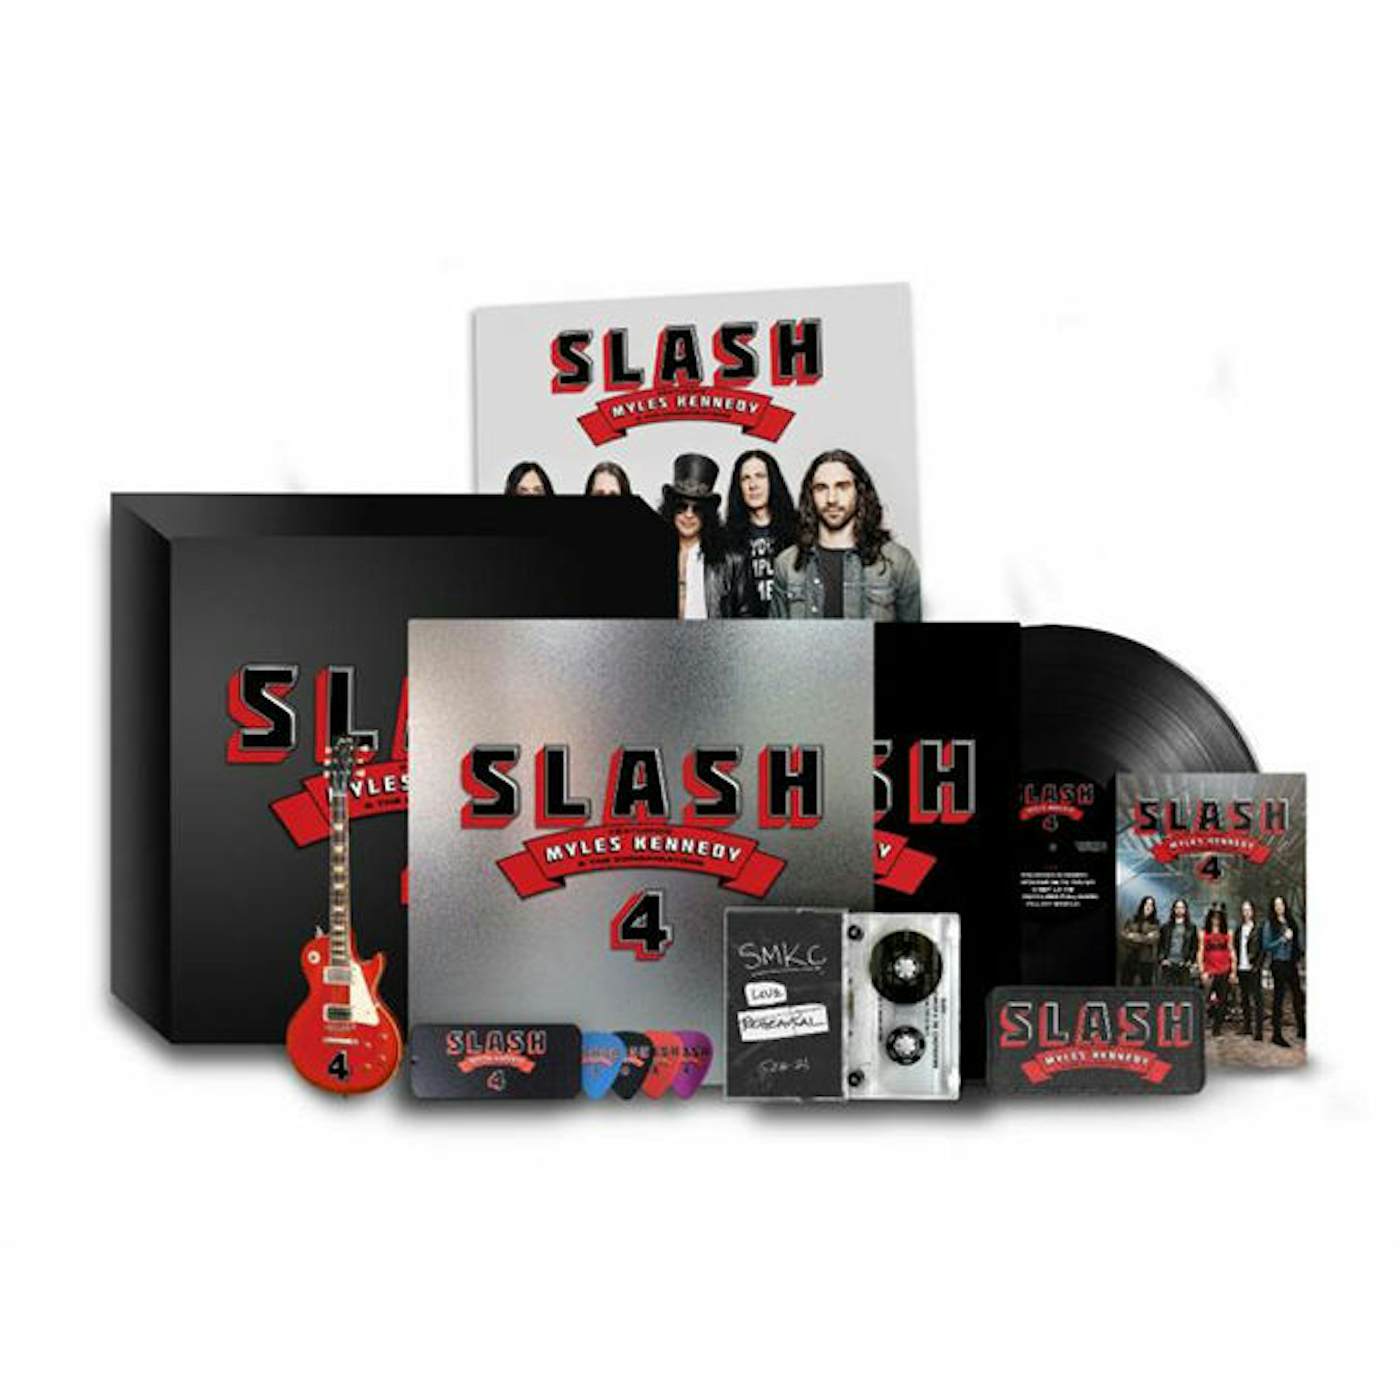 Slash on X: Living The Dream Tour - Exclusive merch bundles available from   - including a screen printed poster. #slashnews  Exclusive merch bundles:   /  X